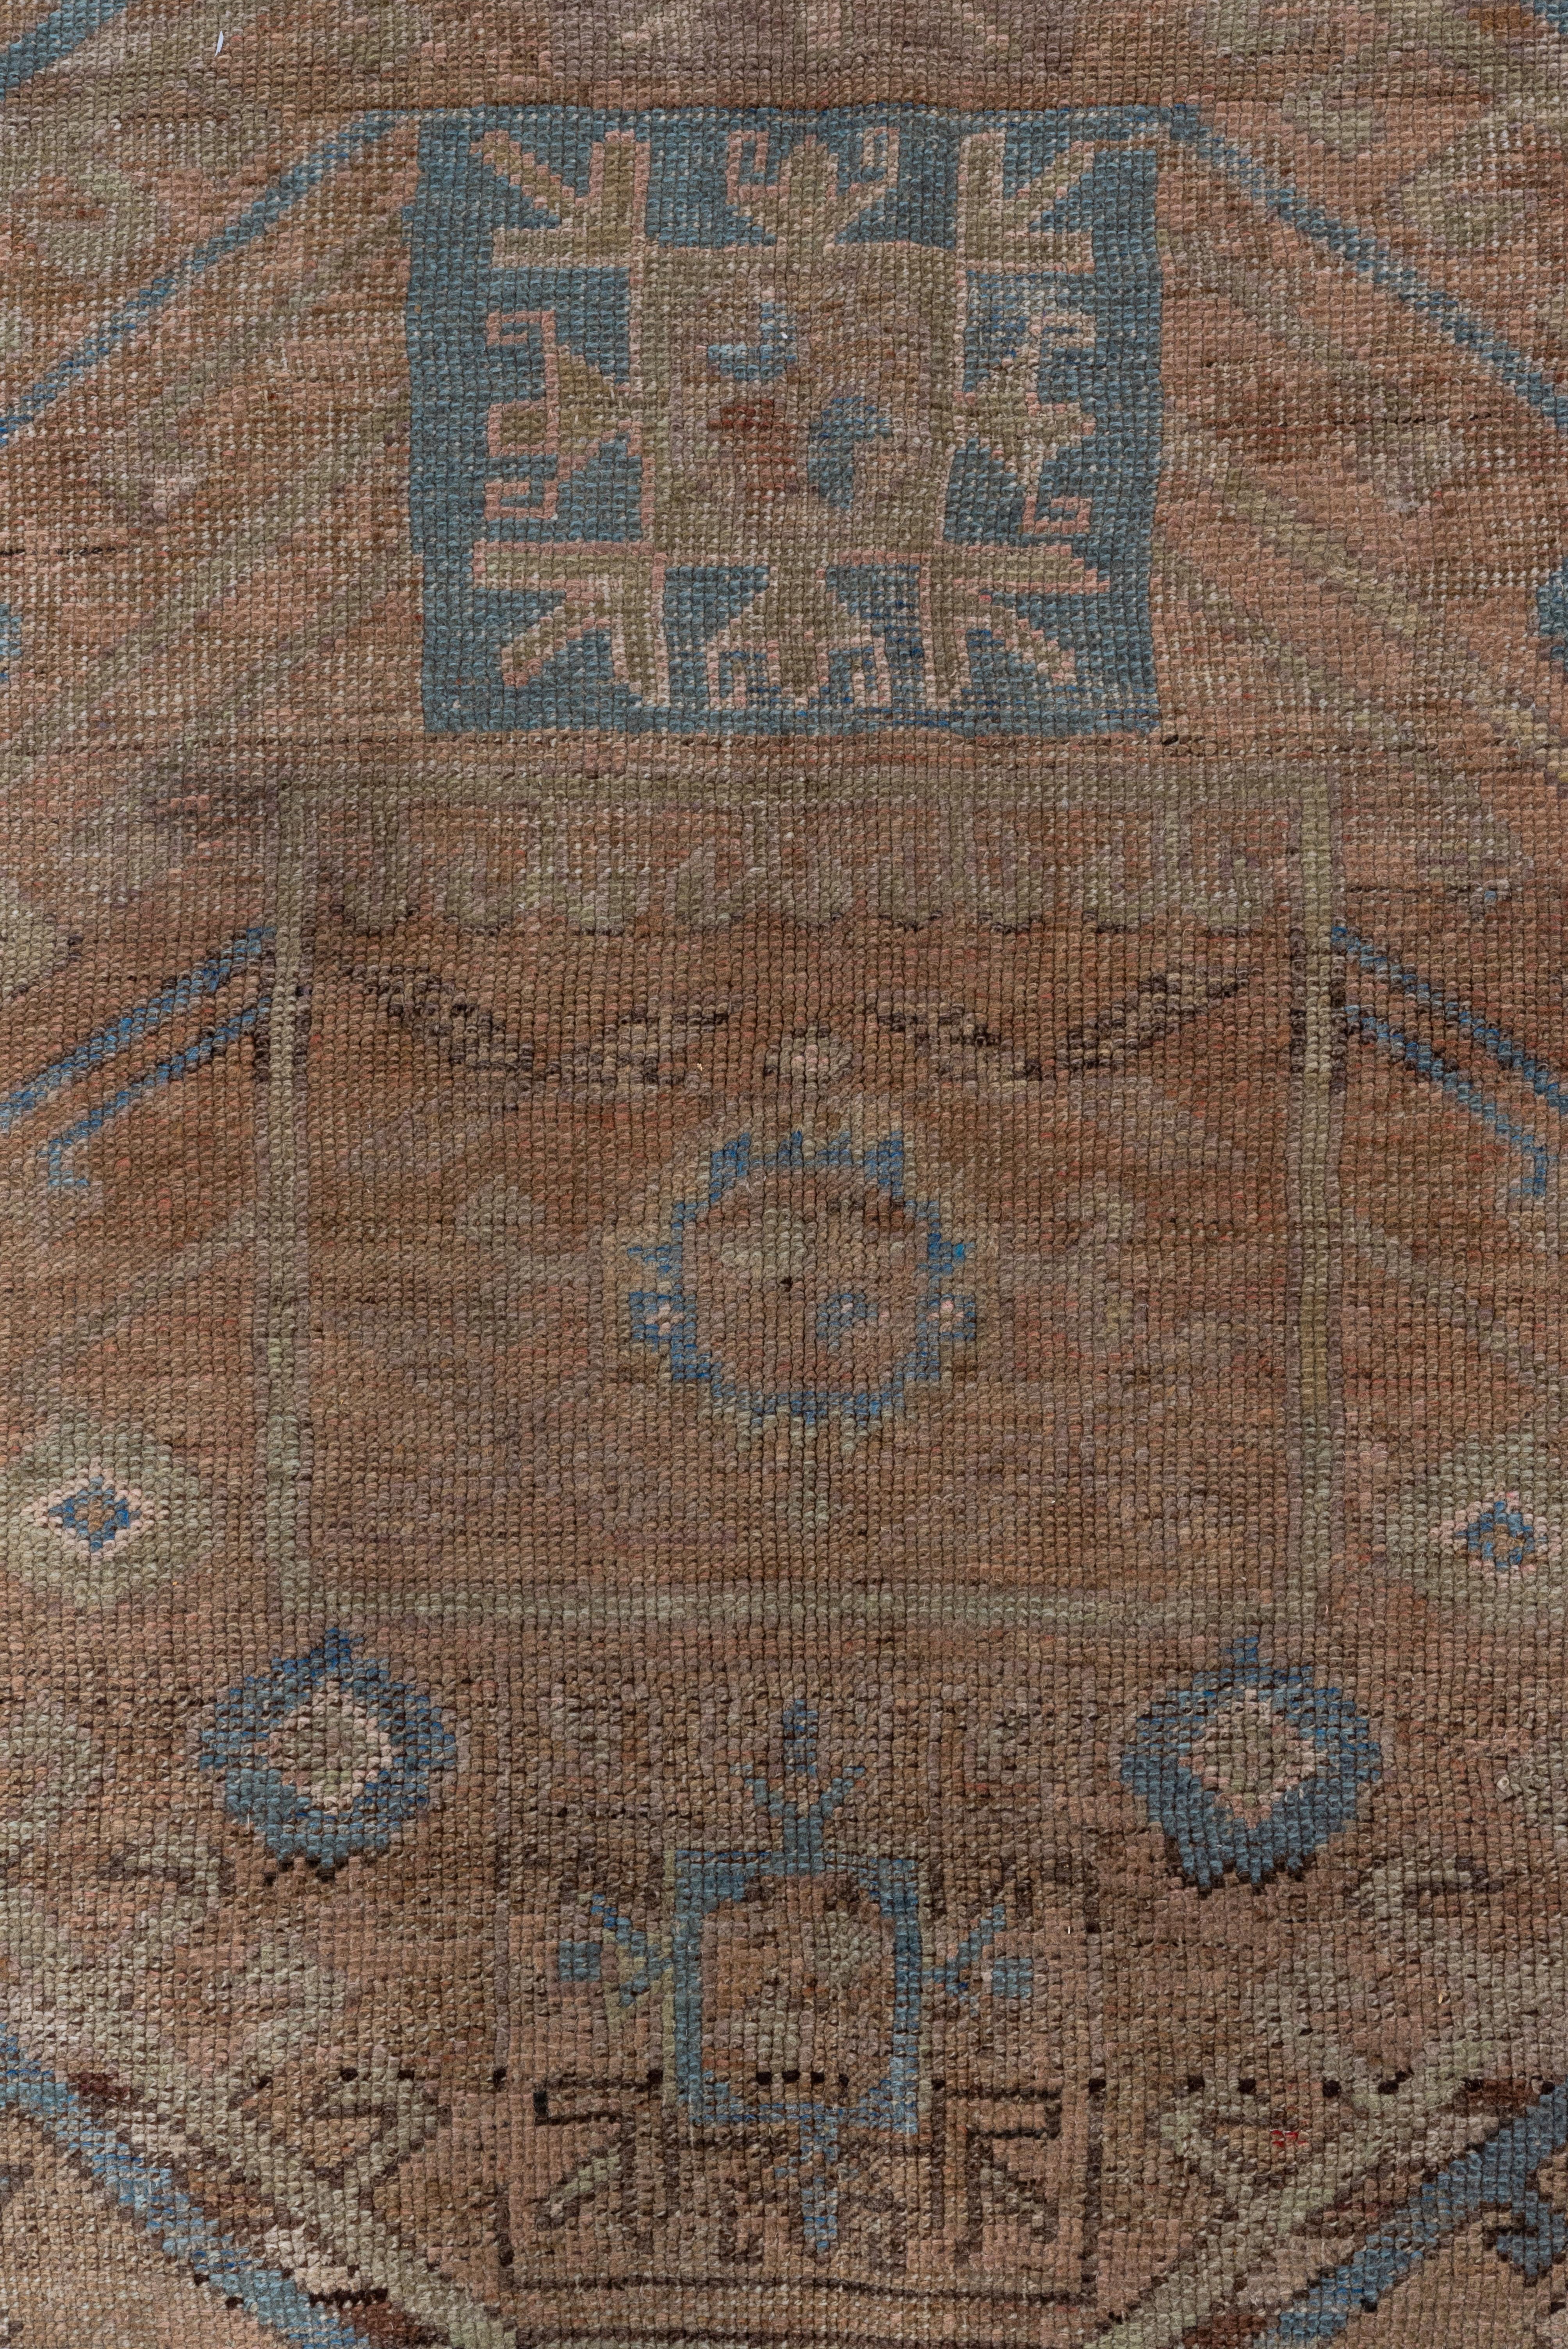 Mid 20th Century Turkish Oushak Gallery Rug, Brown Field & Blue Accents In Good Condition For Sale In New York, NY